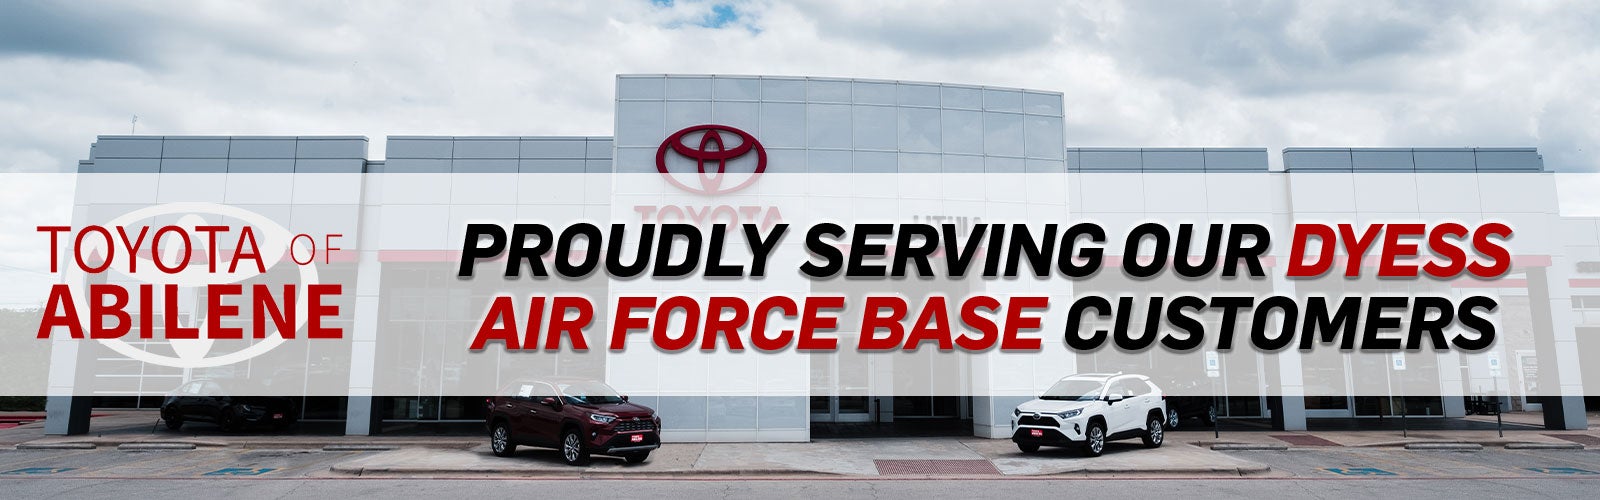 image banner of Lithia Toyota with proudly servicing Dyess Airforce Base text